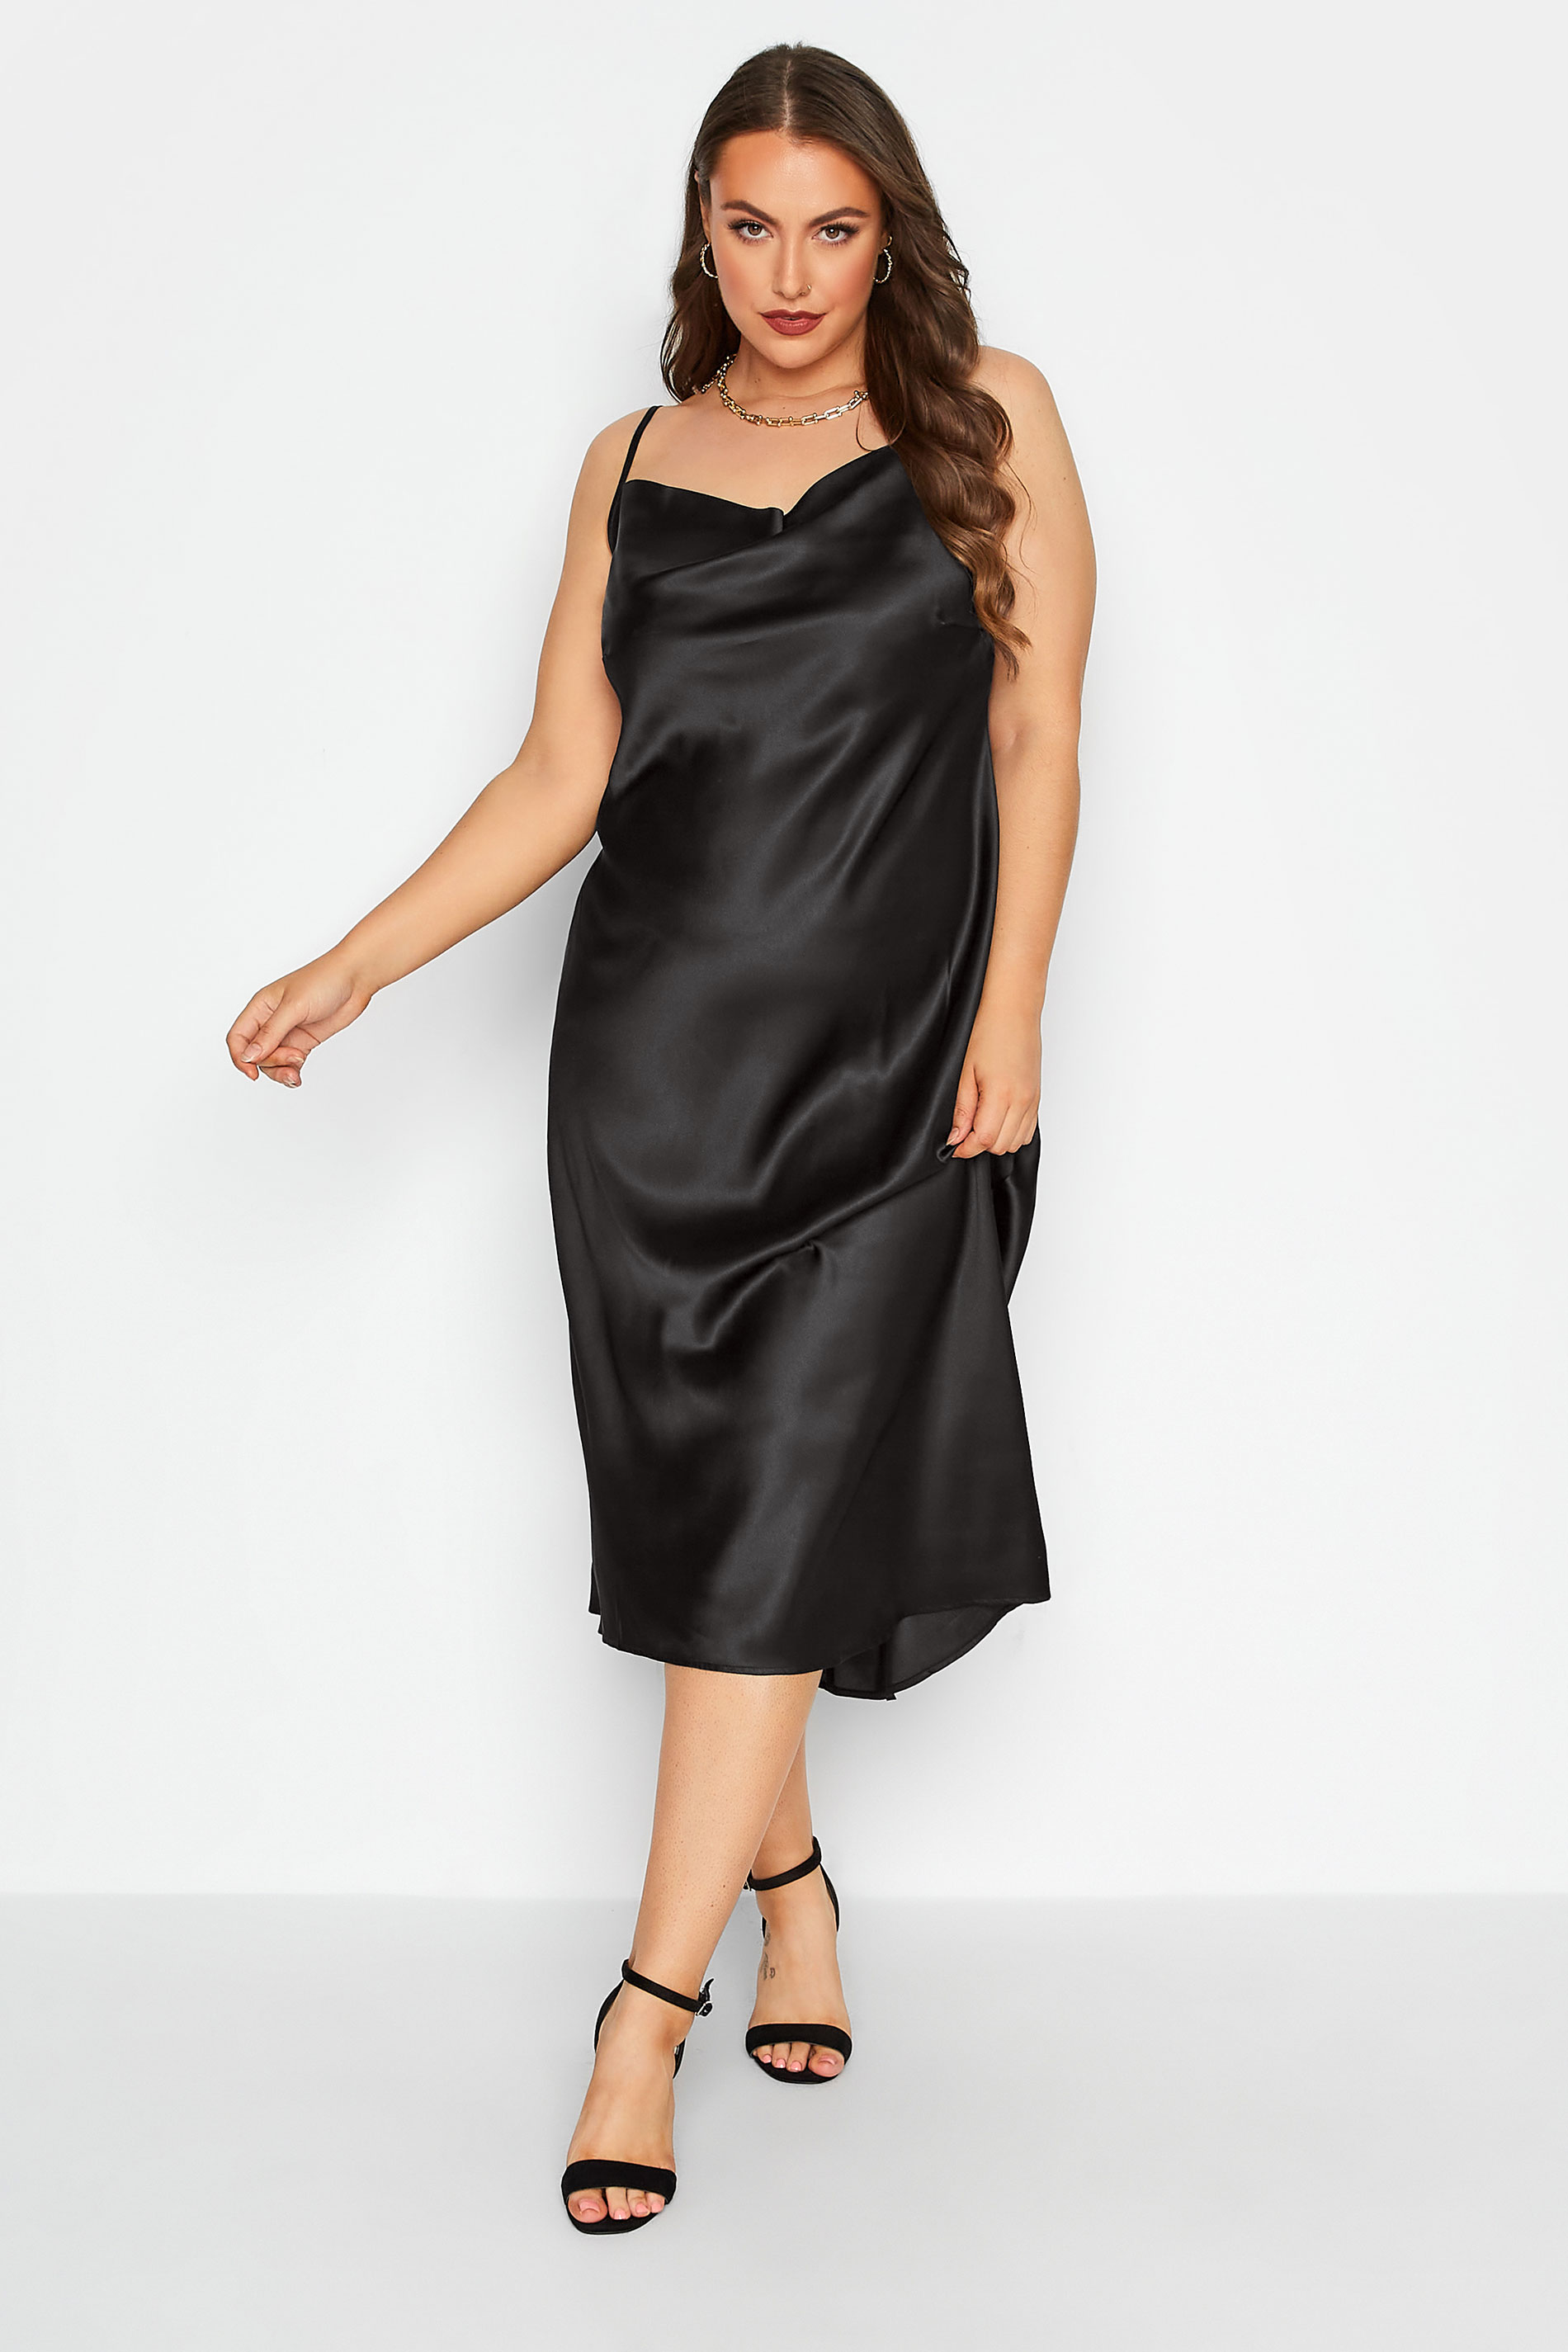 LIMITED COLLECTION Plus Size Black Cowl Neck Dress | Yours Clothing  1